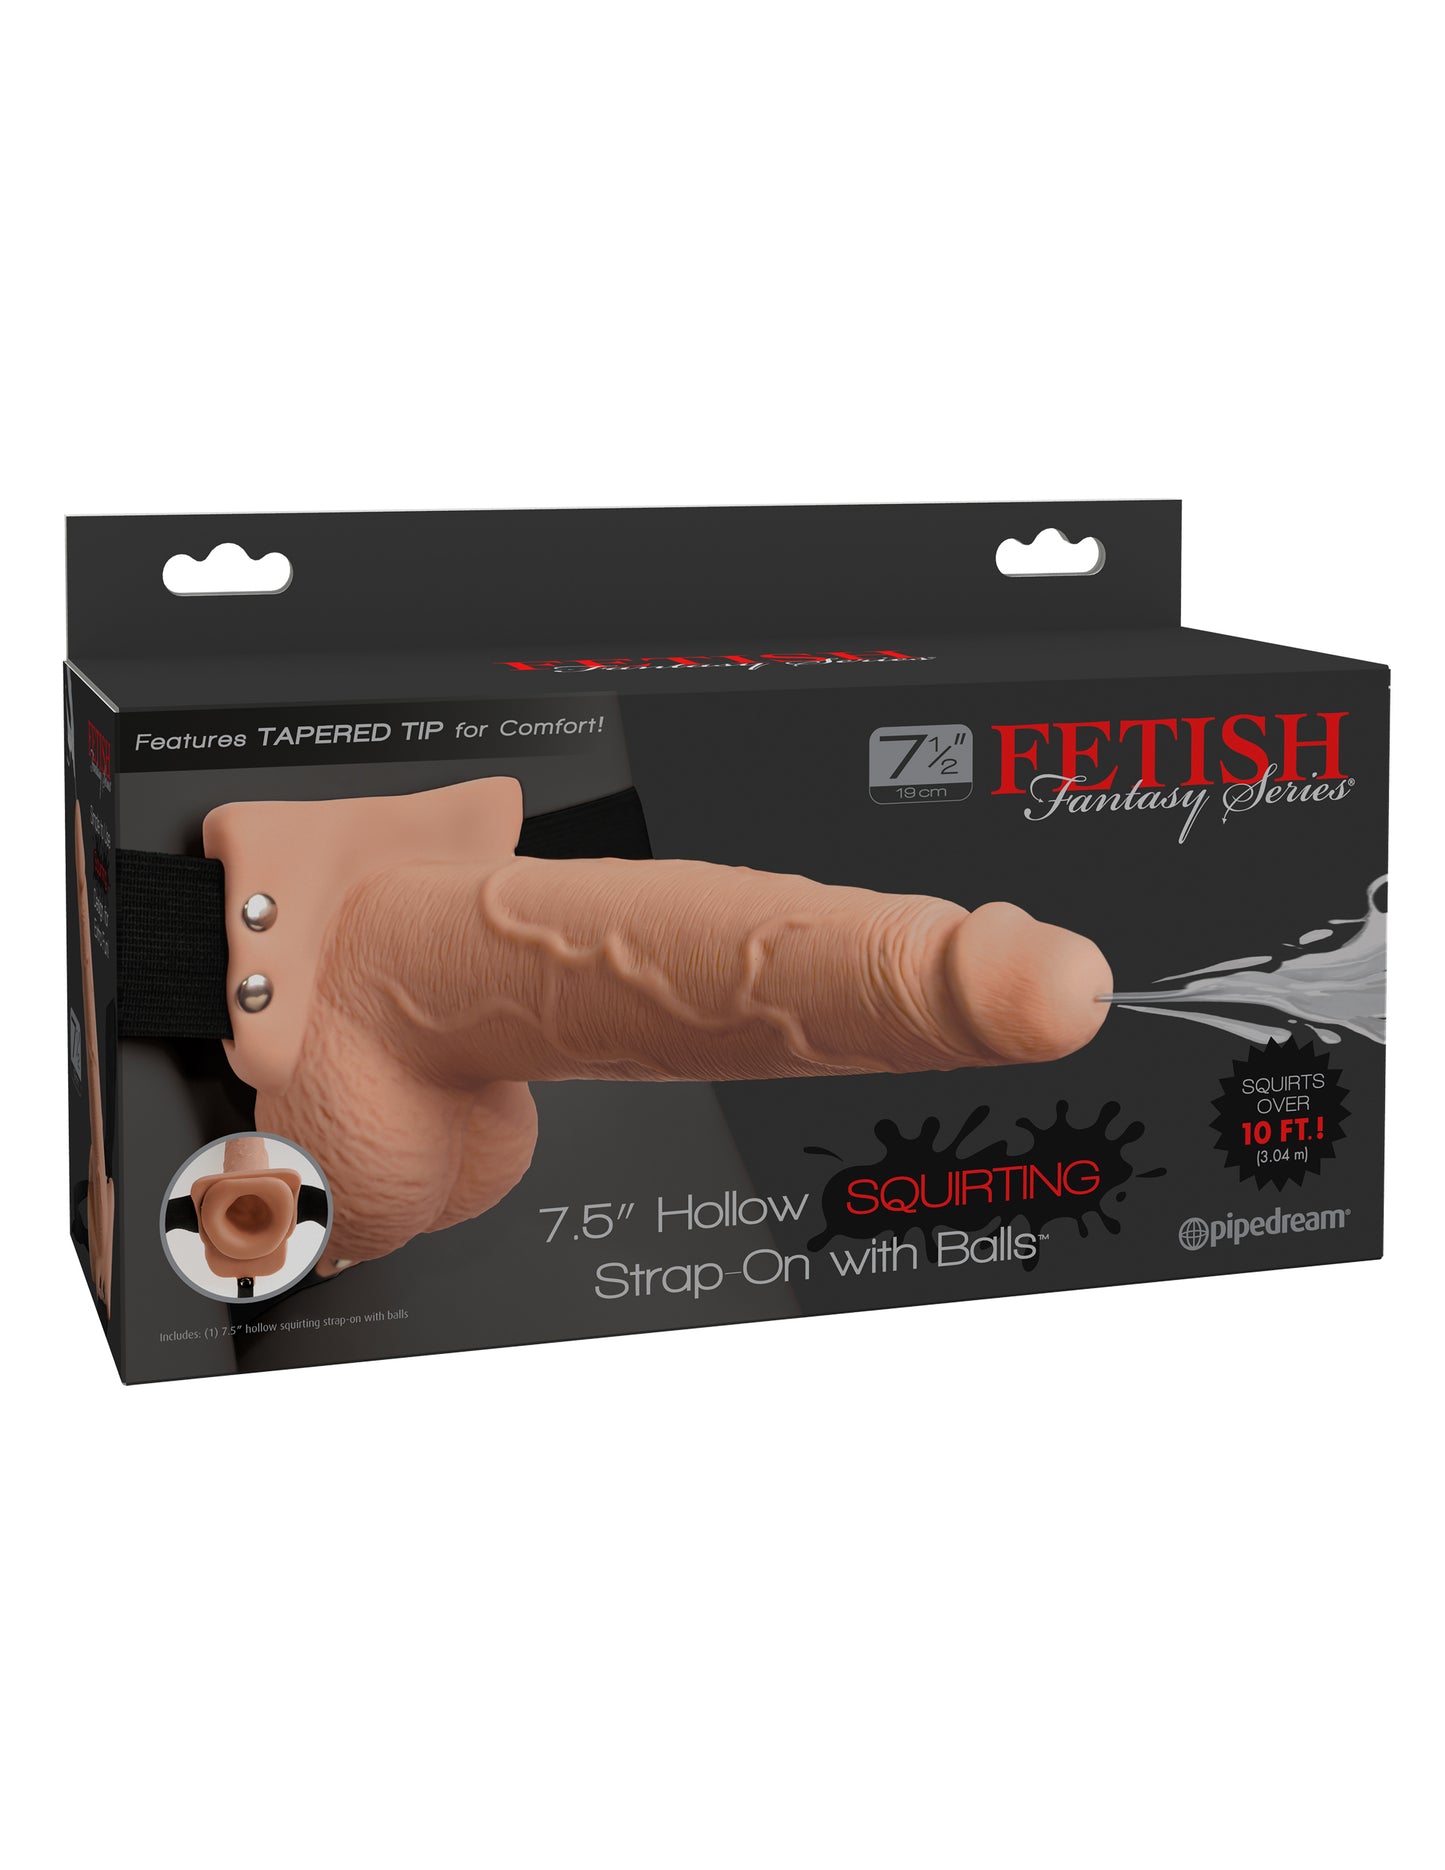 Fetish Fantasy Series 7.5" Hollow Squirting Strap-on With Balls - Flesh PD3397-21